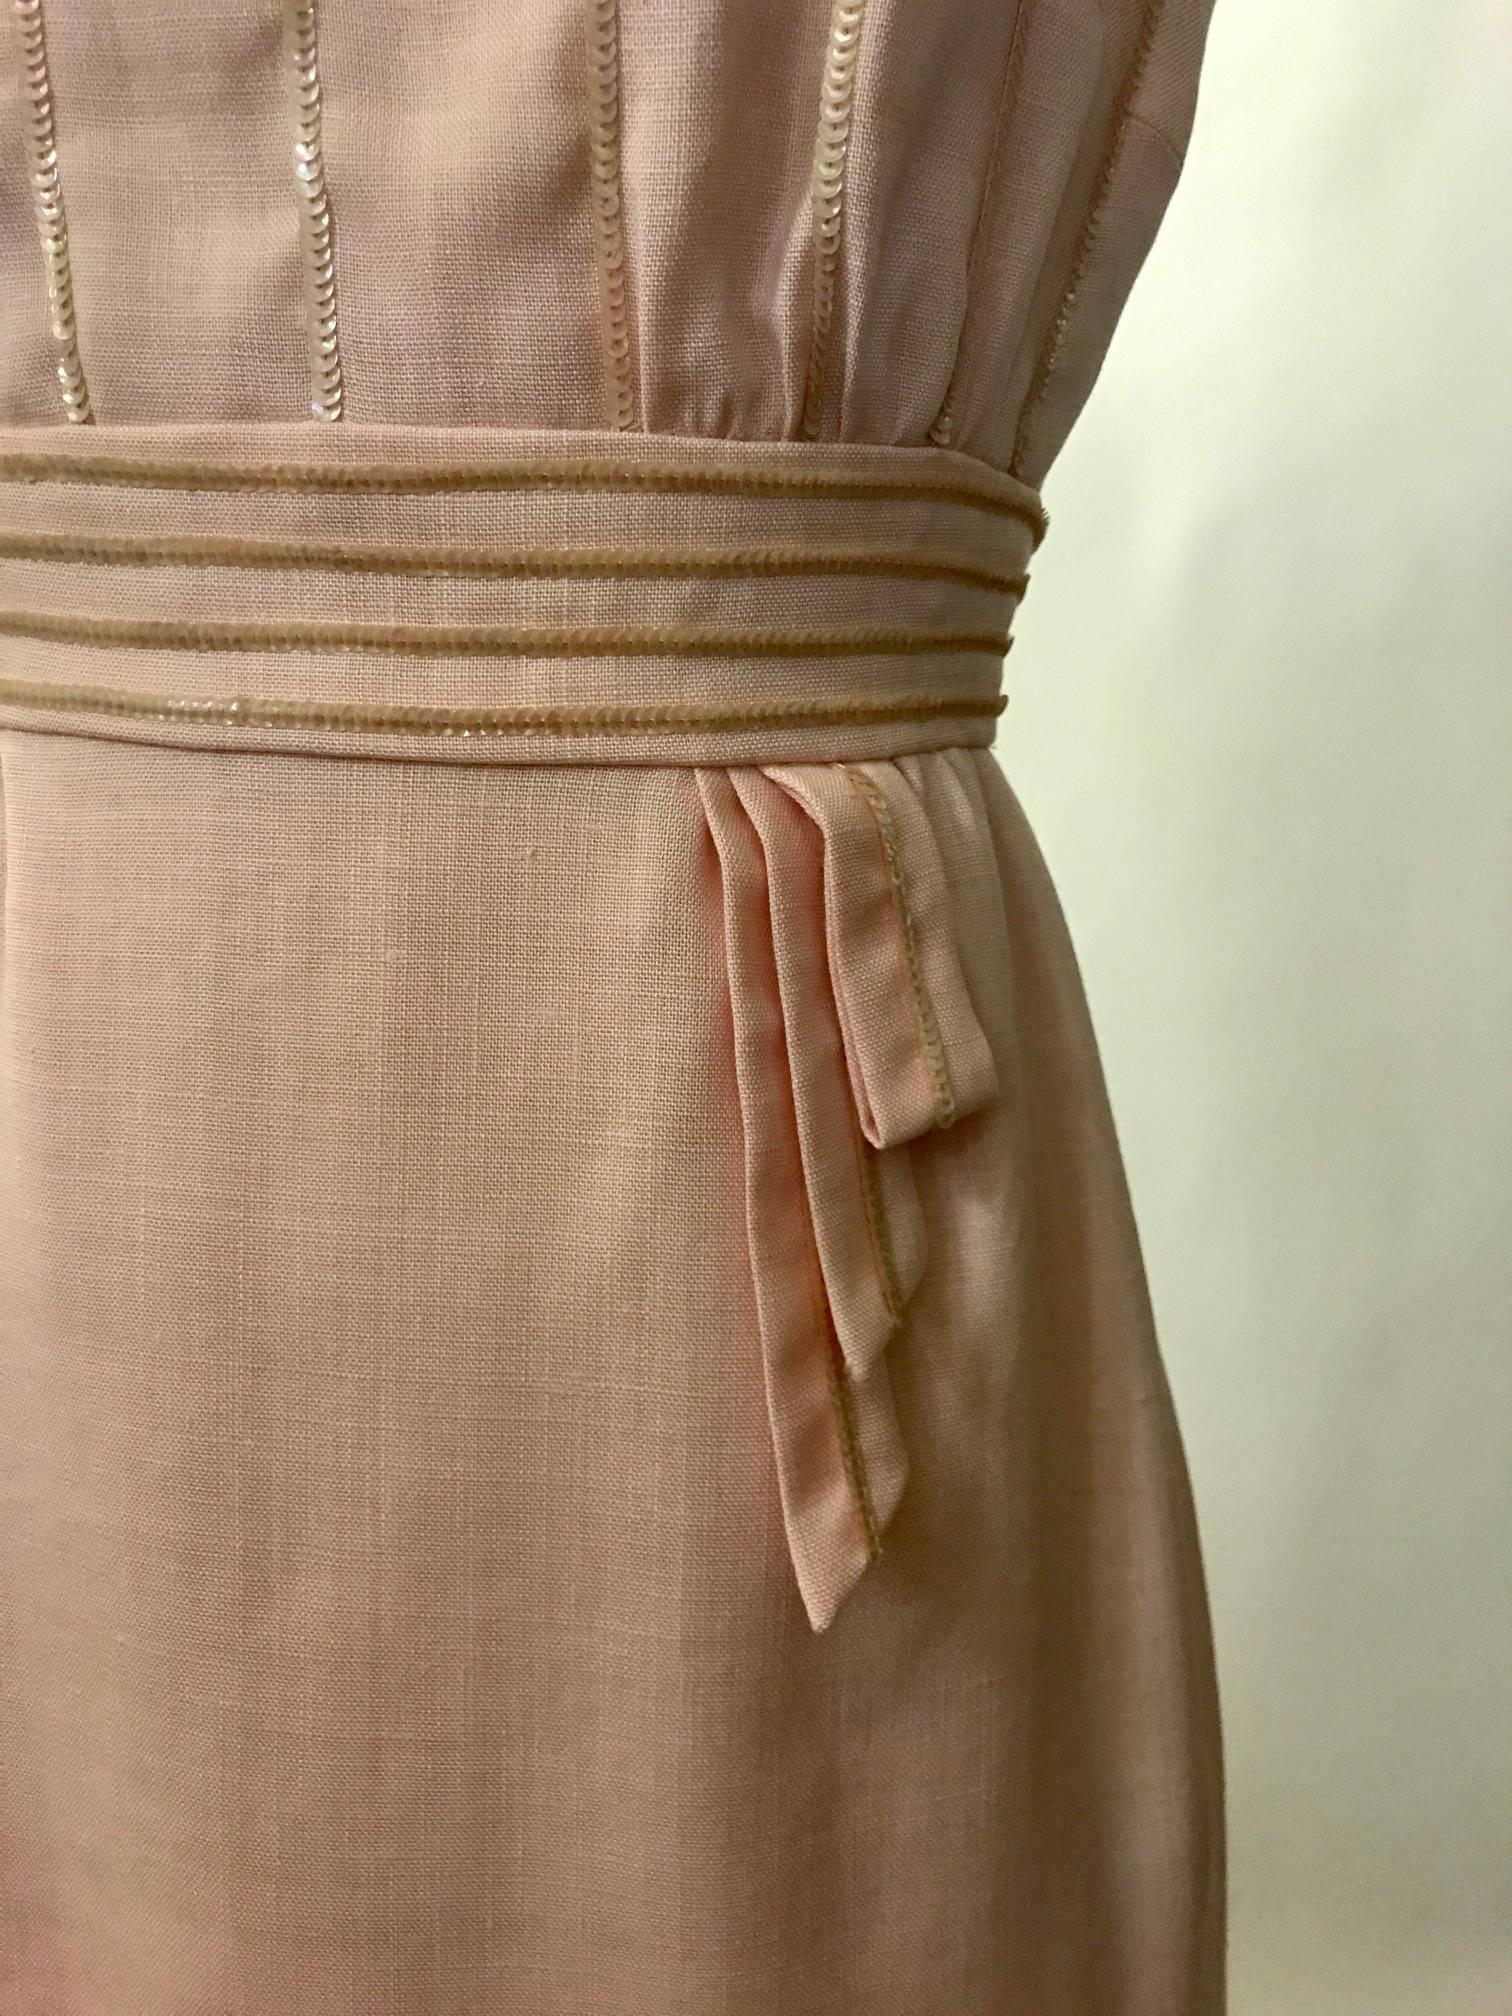 Beige Peggy Hunt Pink Linen Sleeveless Shift Dress with Sequin Embellishment, 1960s  For Sale